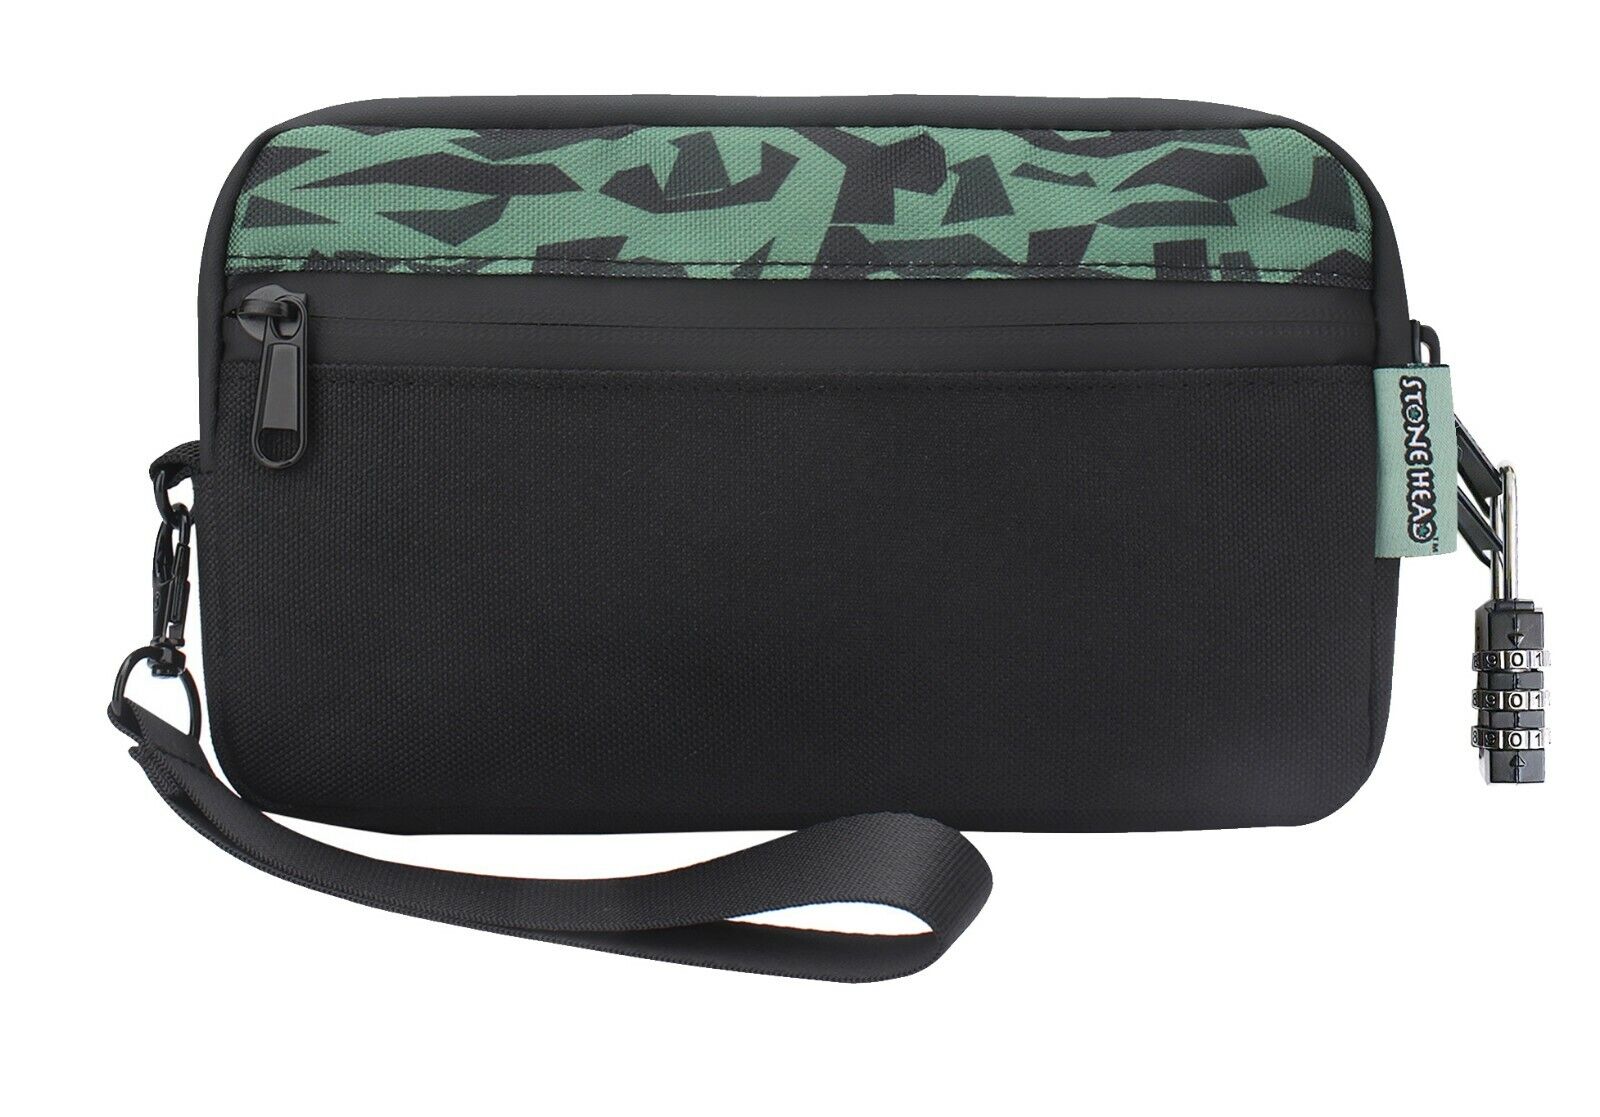 OFFICIAL STONEHEAD® Blk Camo Smell Proof Bag with Combination Lock & Accessories